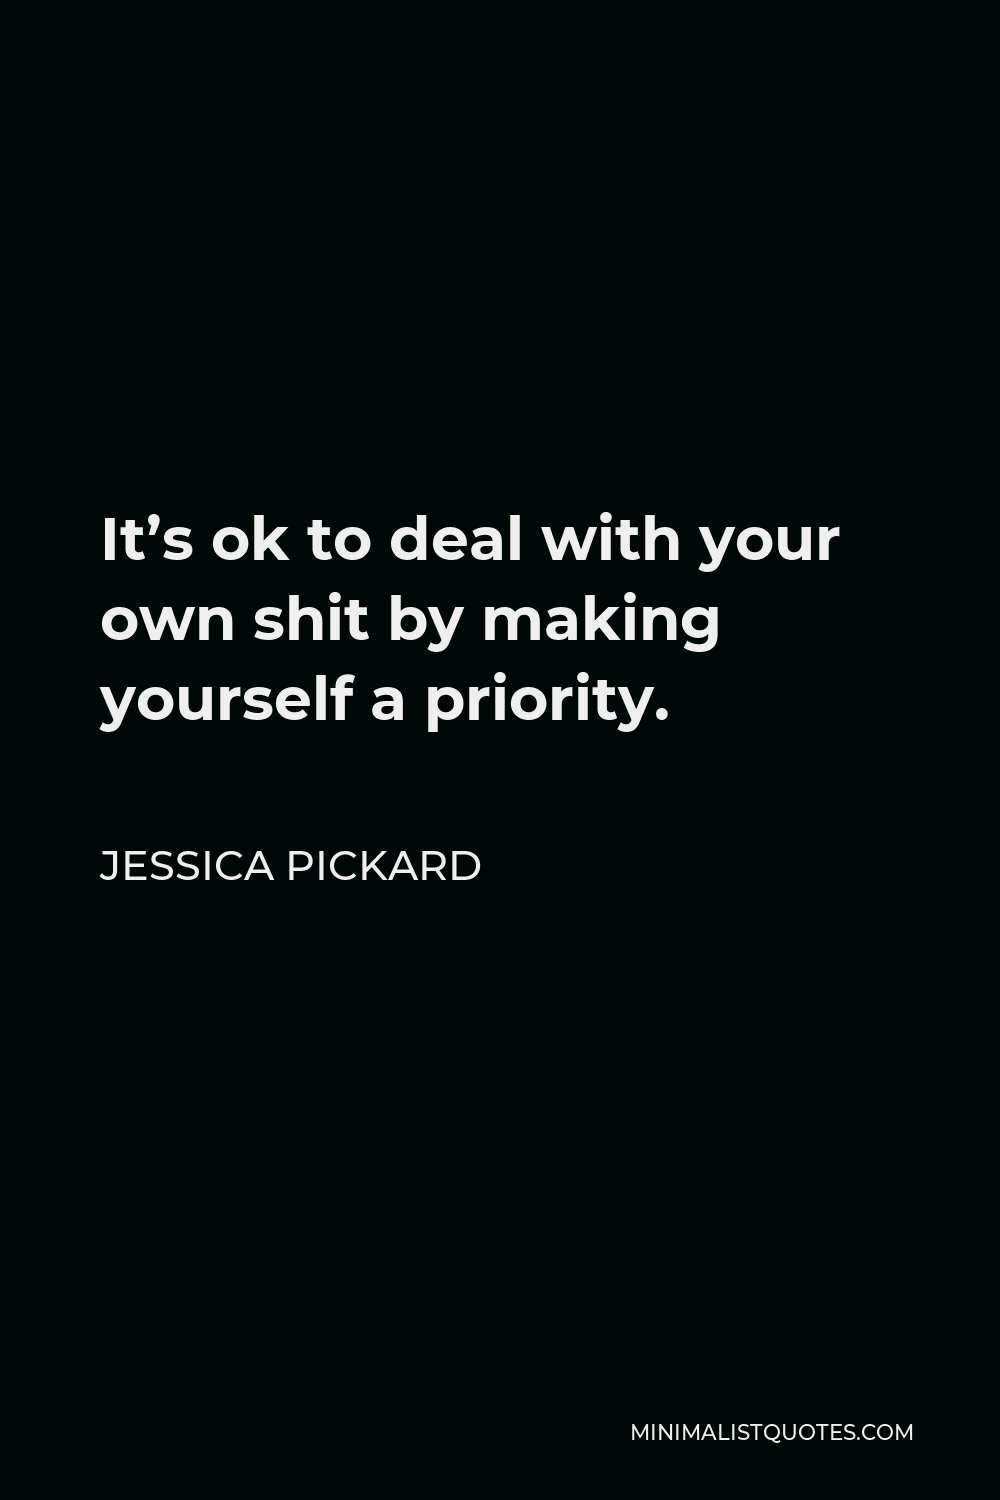 Jessica Pickard Quote - It’s ok to deal with your own shit by making yourself a priority.